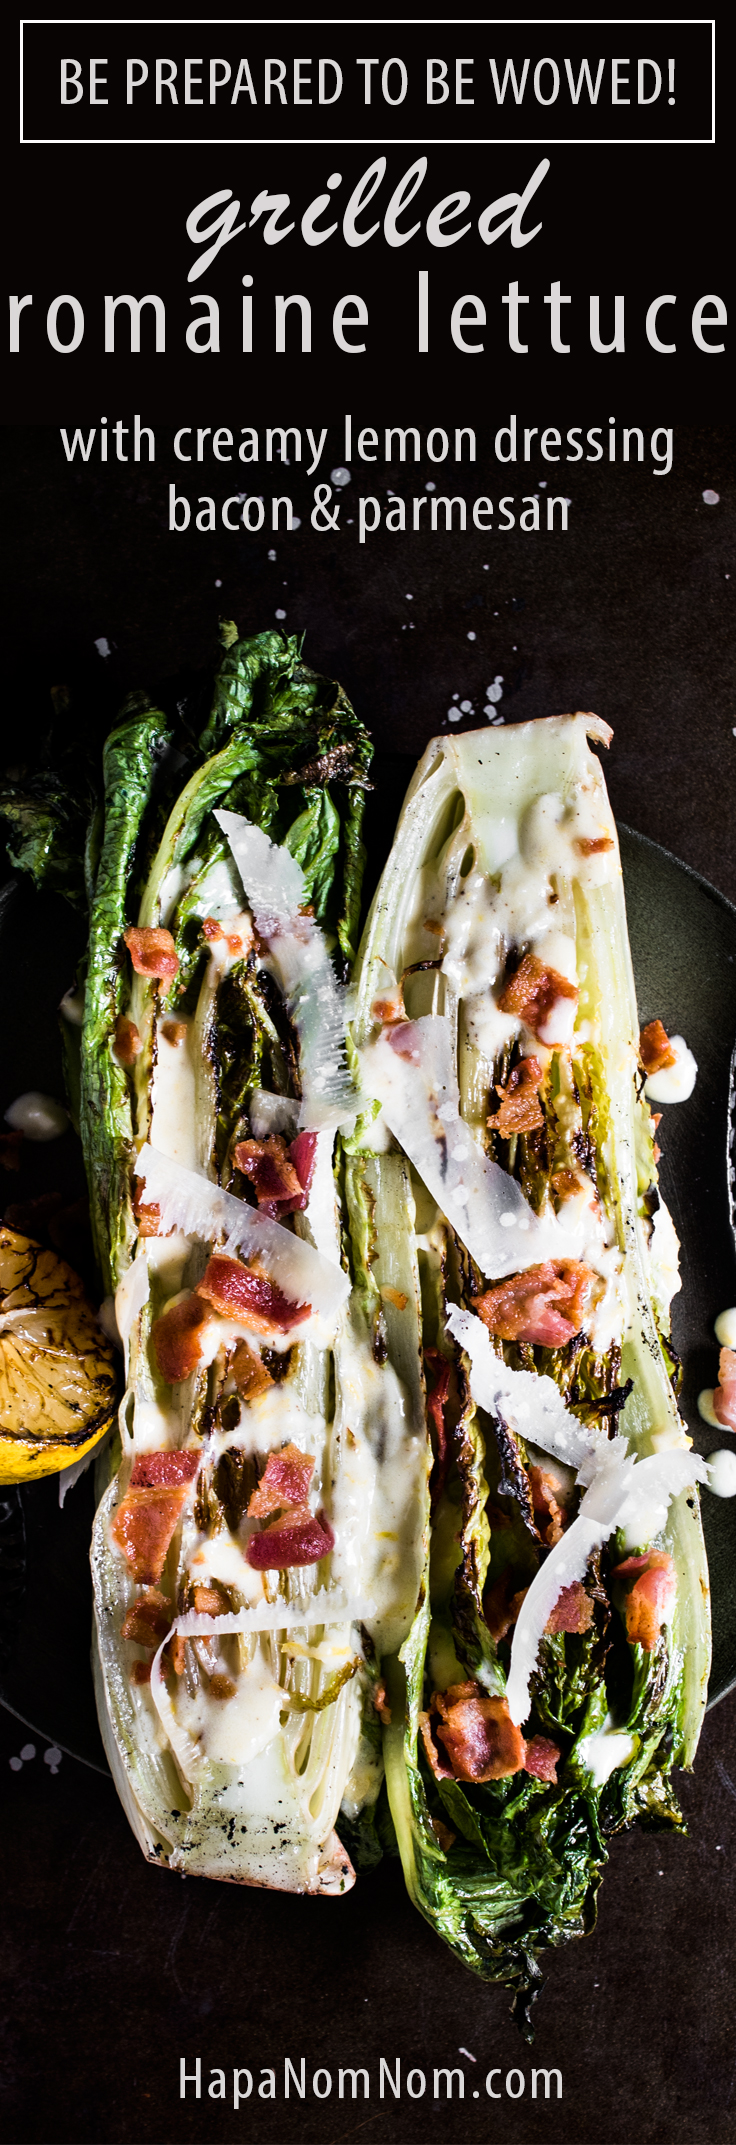 You’ve got to give this Grilled Romaine Lettuce with Creamy Lemon Dressing a try! The entire dish takes 10 -15 minutes from start to finish and it's insanely delicious!!!